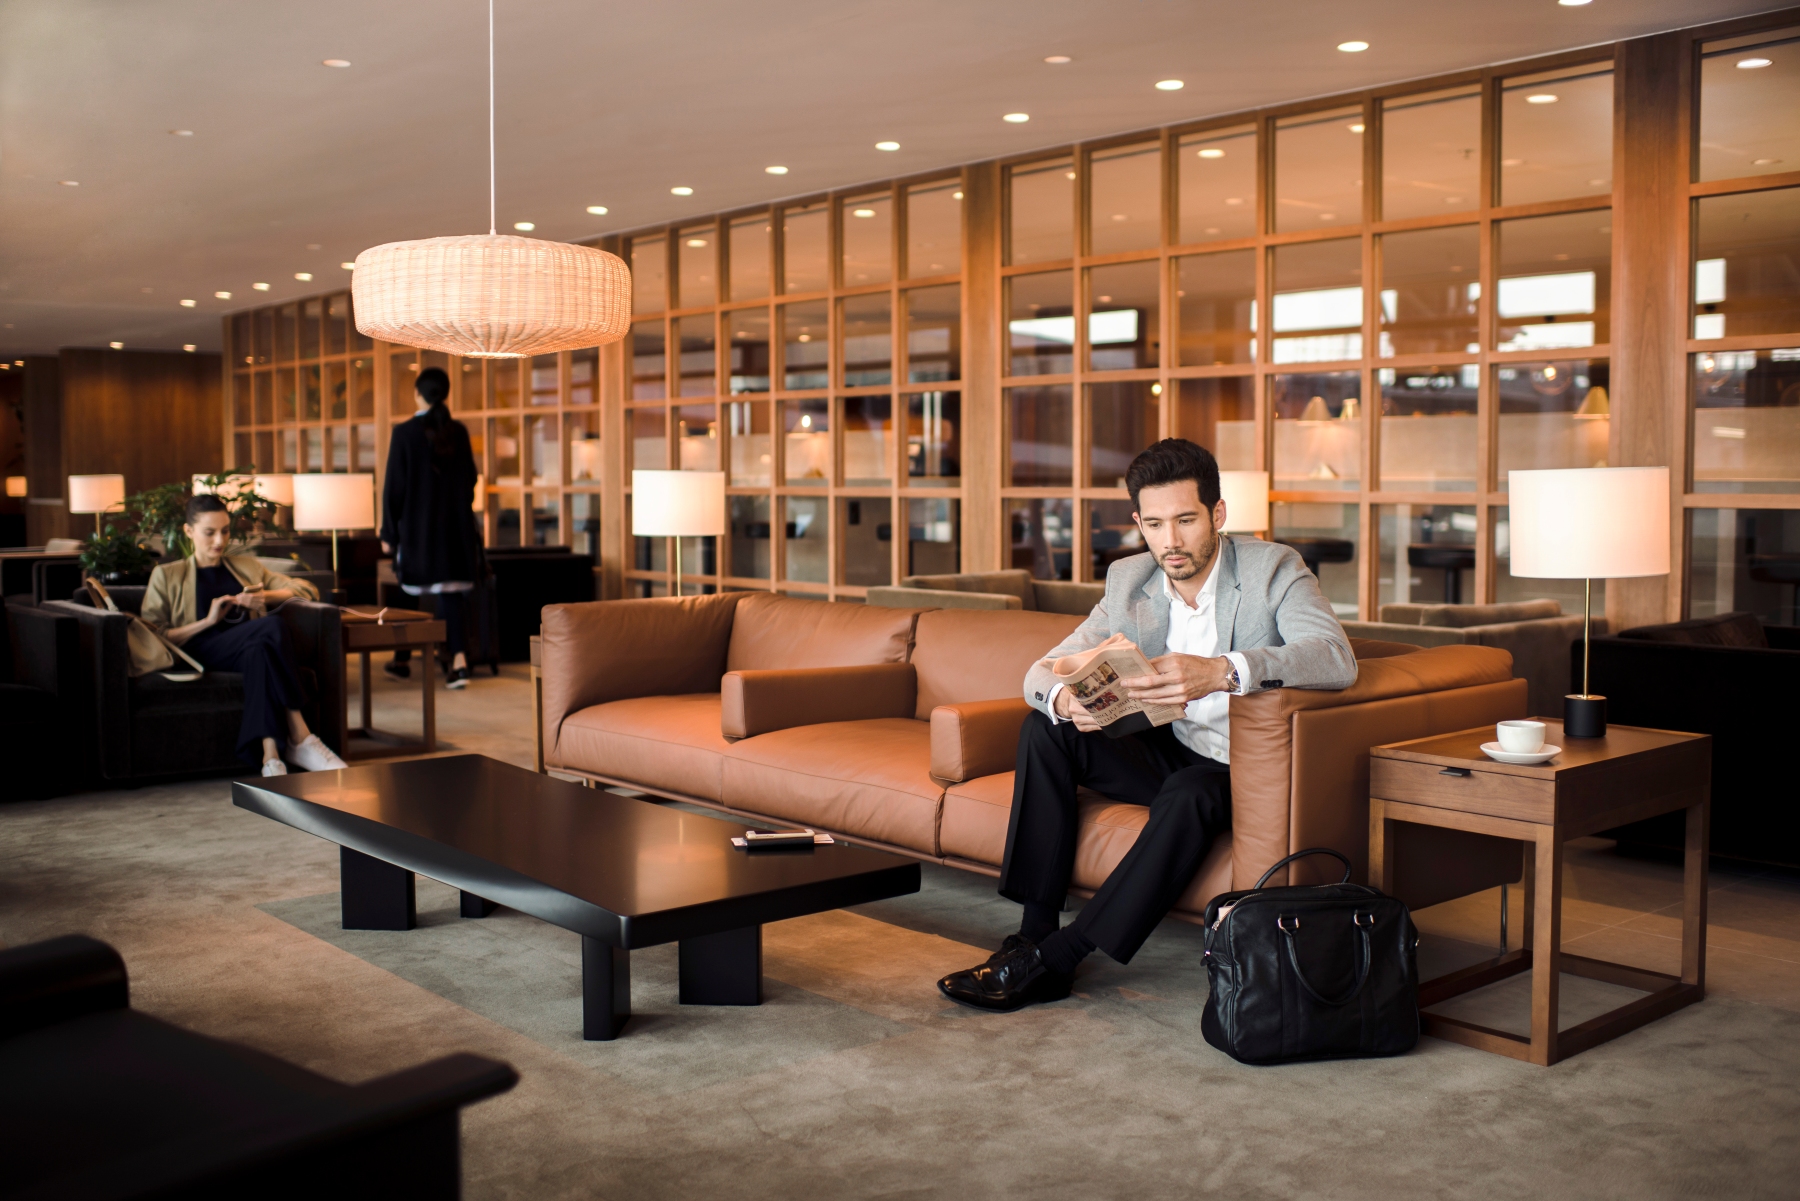 Cathay Pacific 'The Pier' Business Class Lounge, Hong Kong.